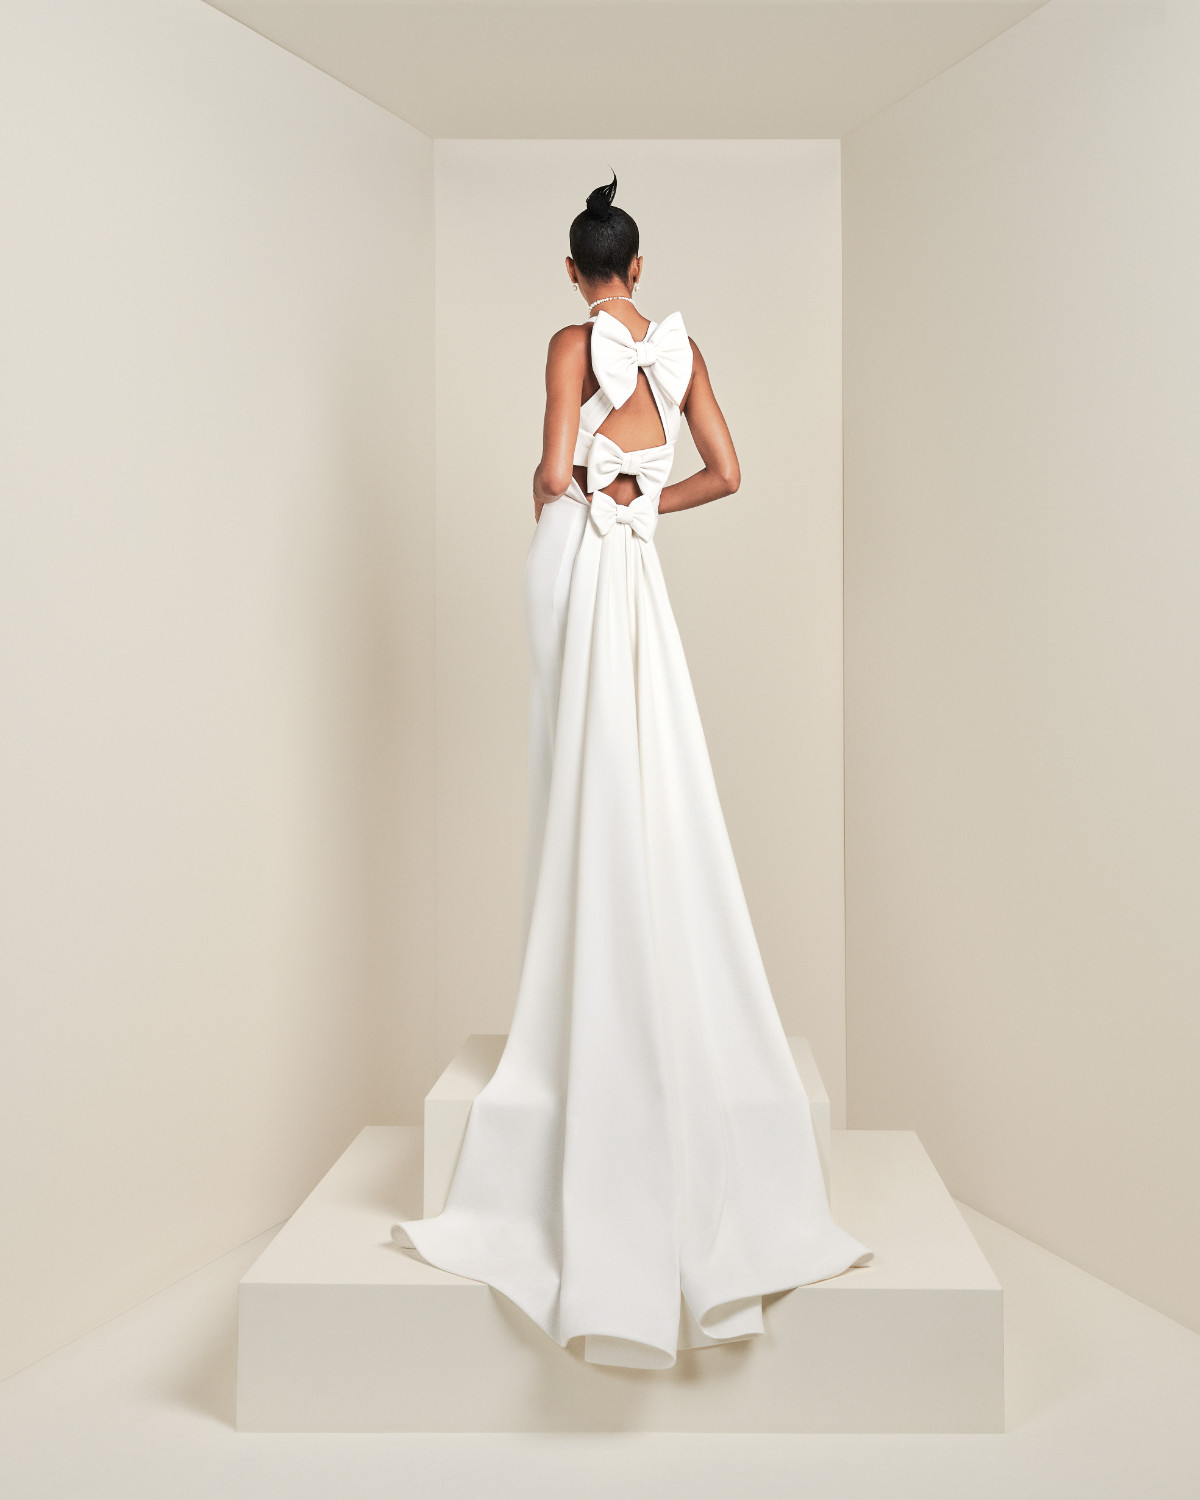 Viktor&Rolf Present Their New Mariage Spring/Summer 2025 Collection